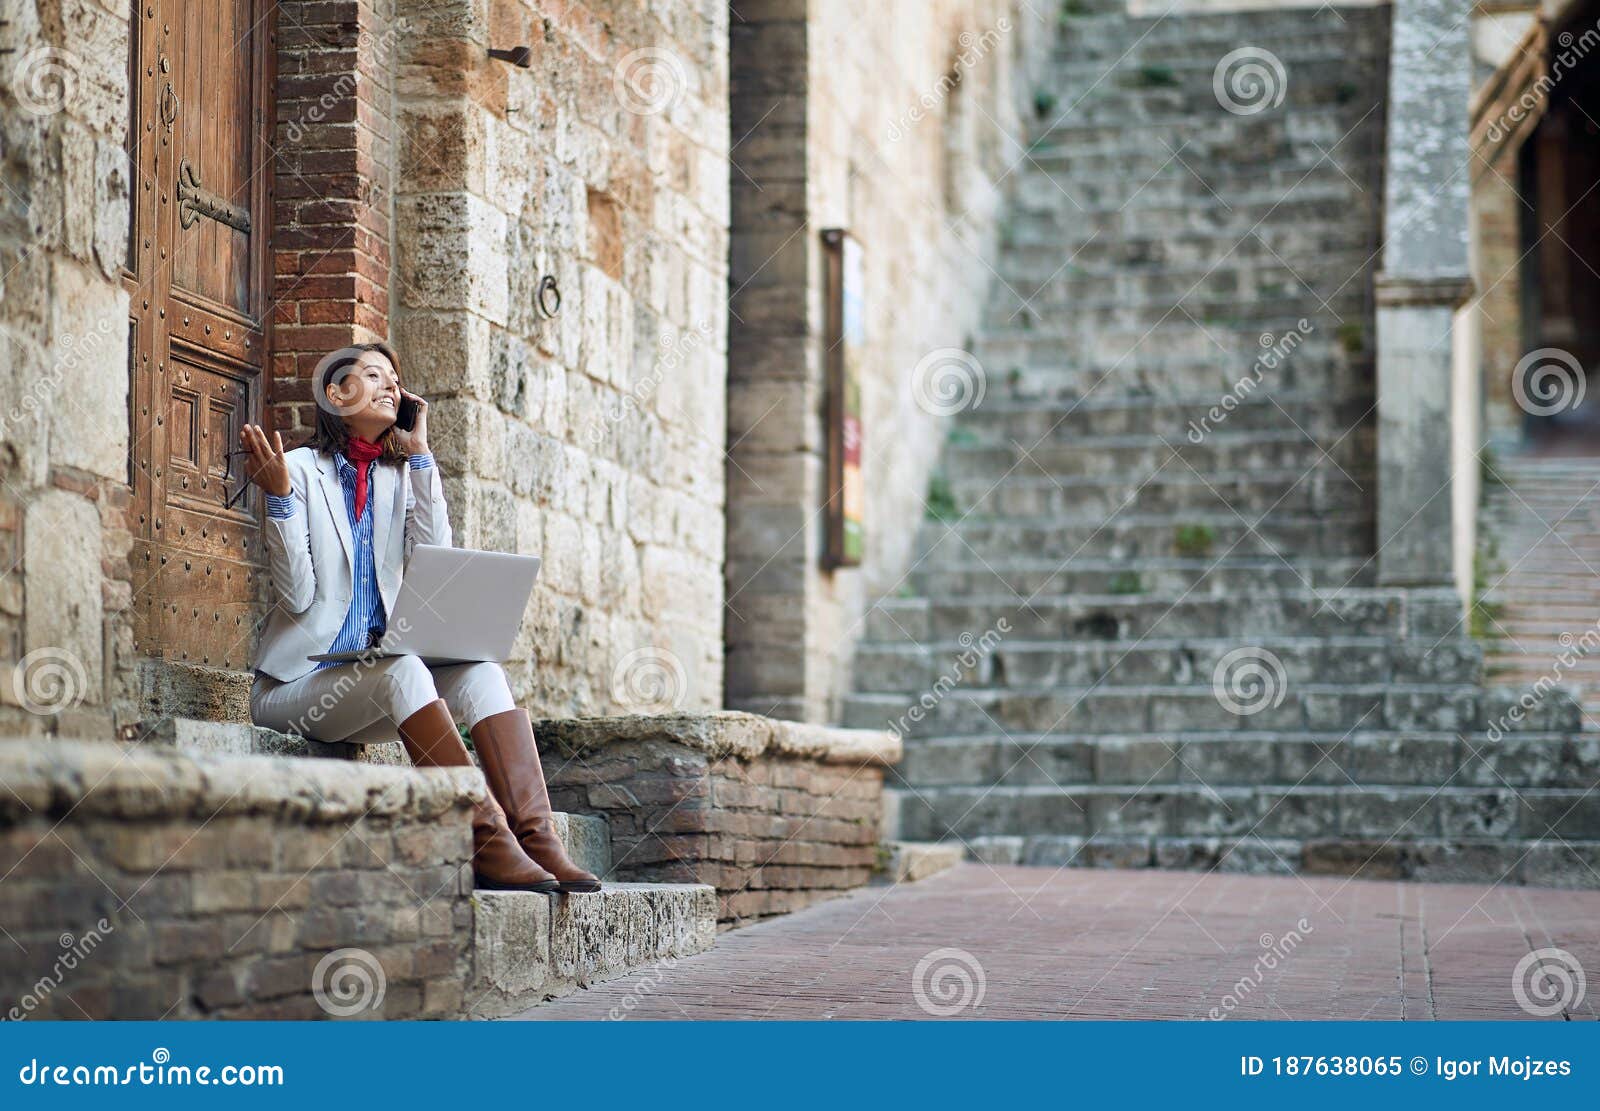 young female talking on her cell phone with laptop, sitting outdoor on stairways in italy